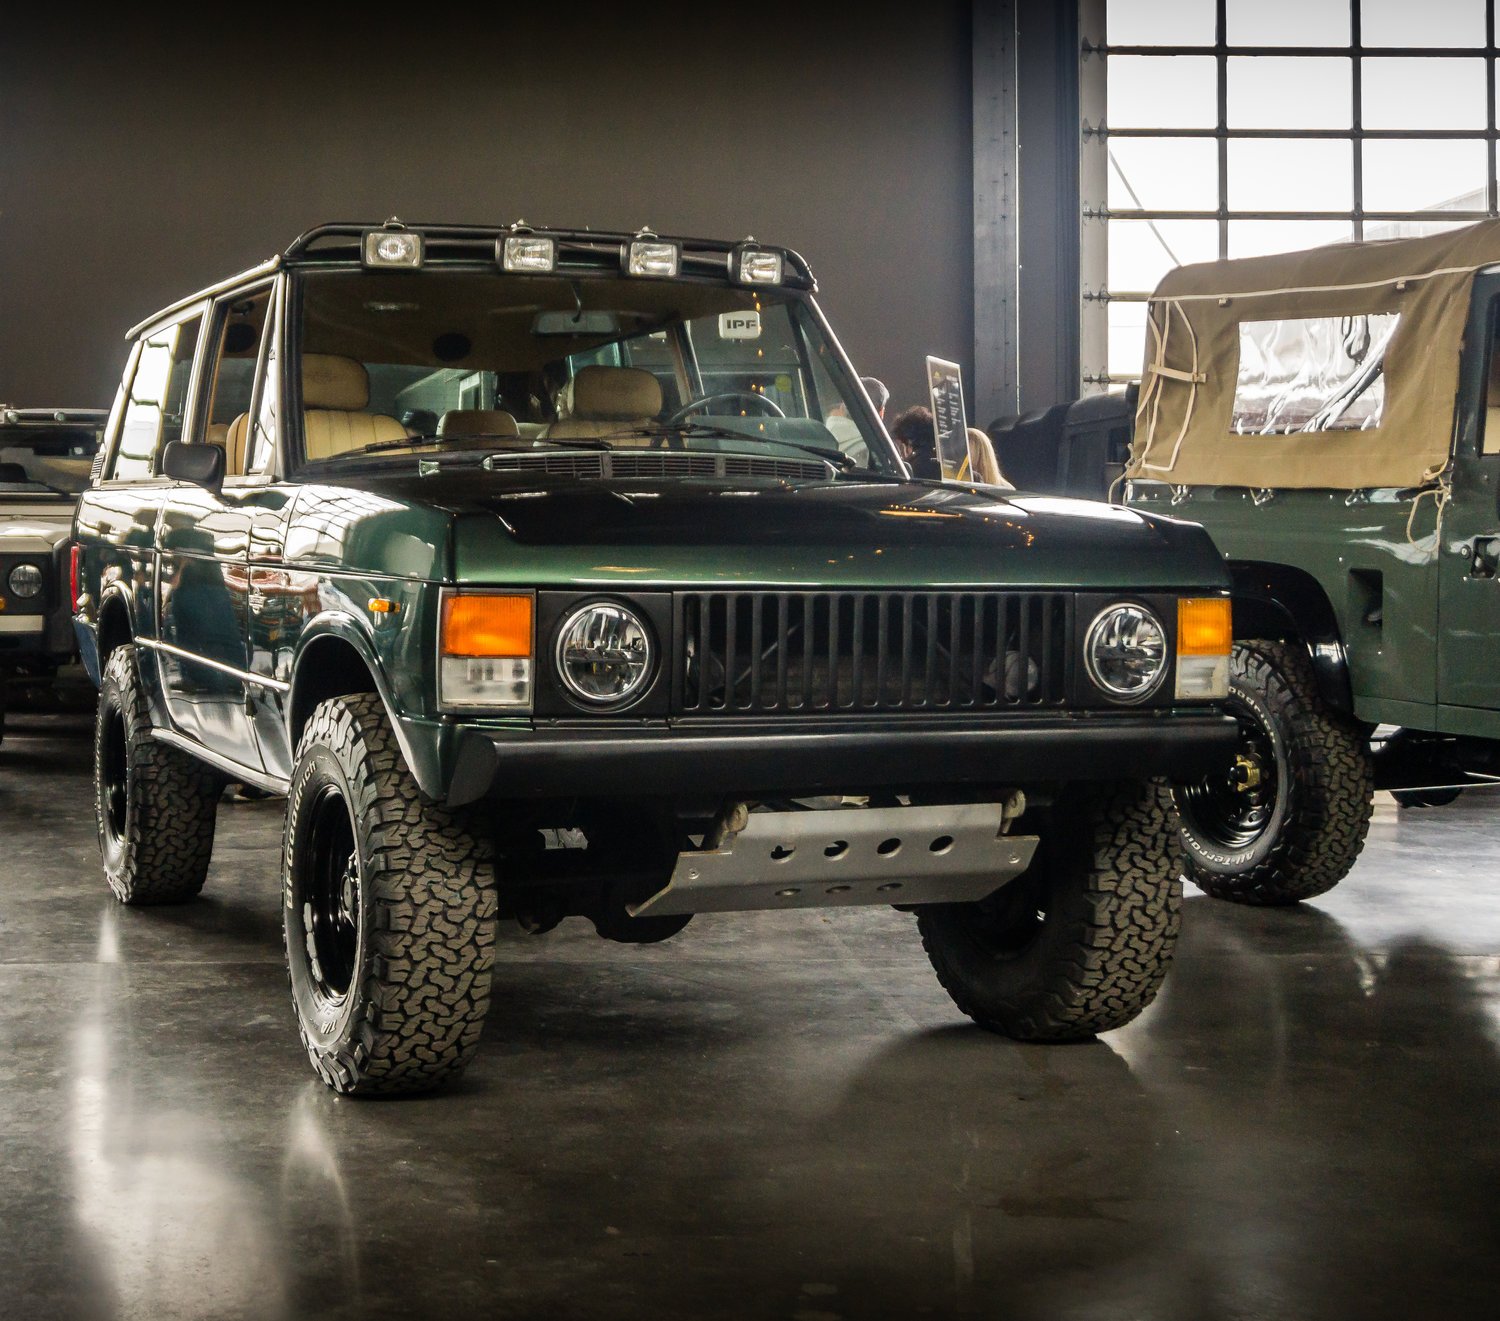 Finished in Ardennes metallic green our restored 1974 Range Rover Classic stands proudly amongst other automotive beasts. 

#landrover #rangeroverclassic #rrc #classic #defender #landroverseries